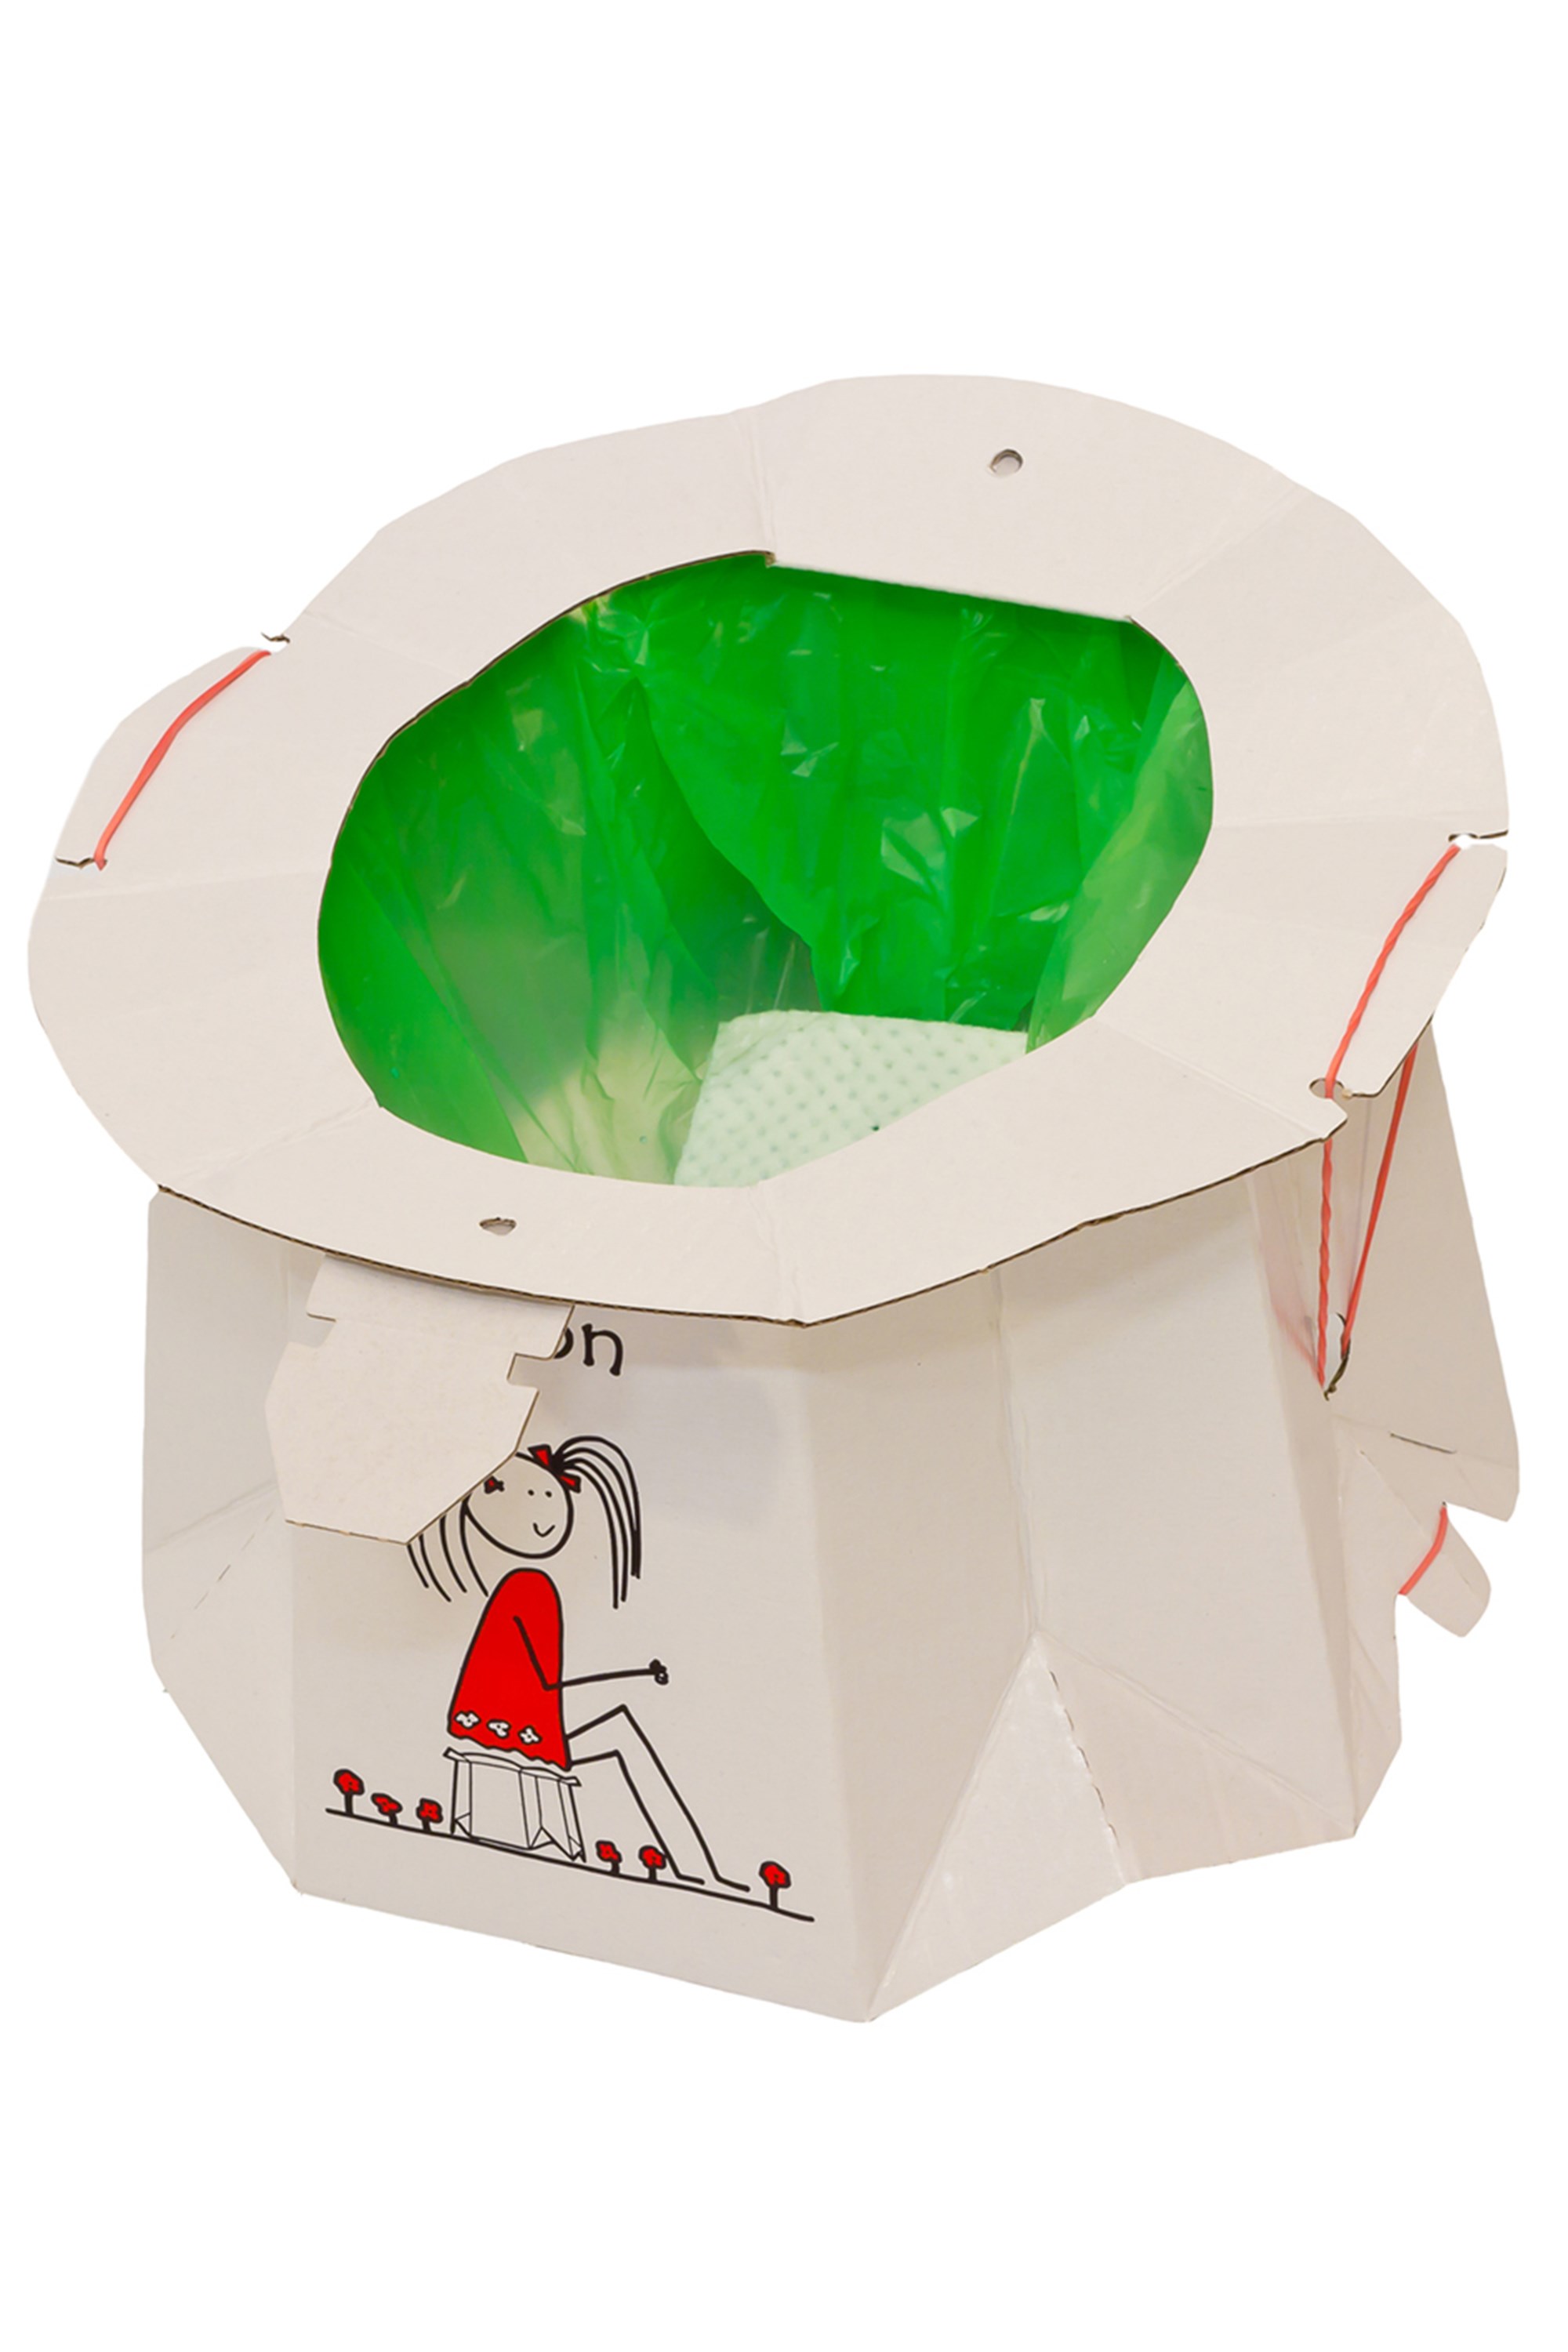 Disposable Travel Potty -